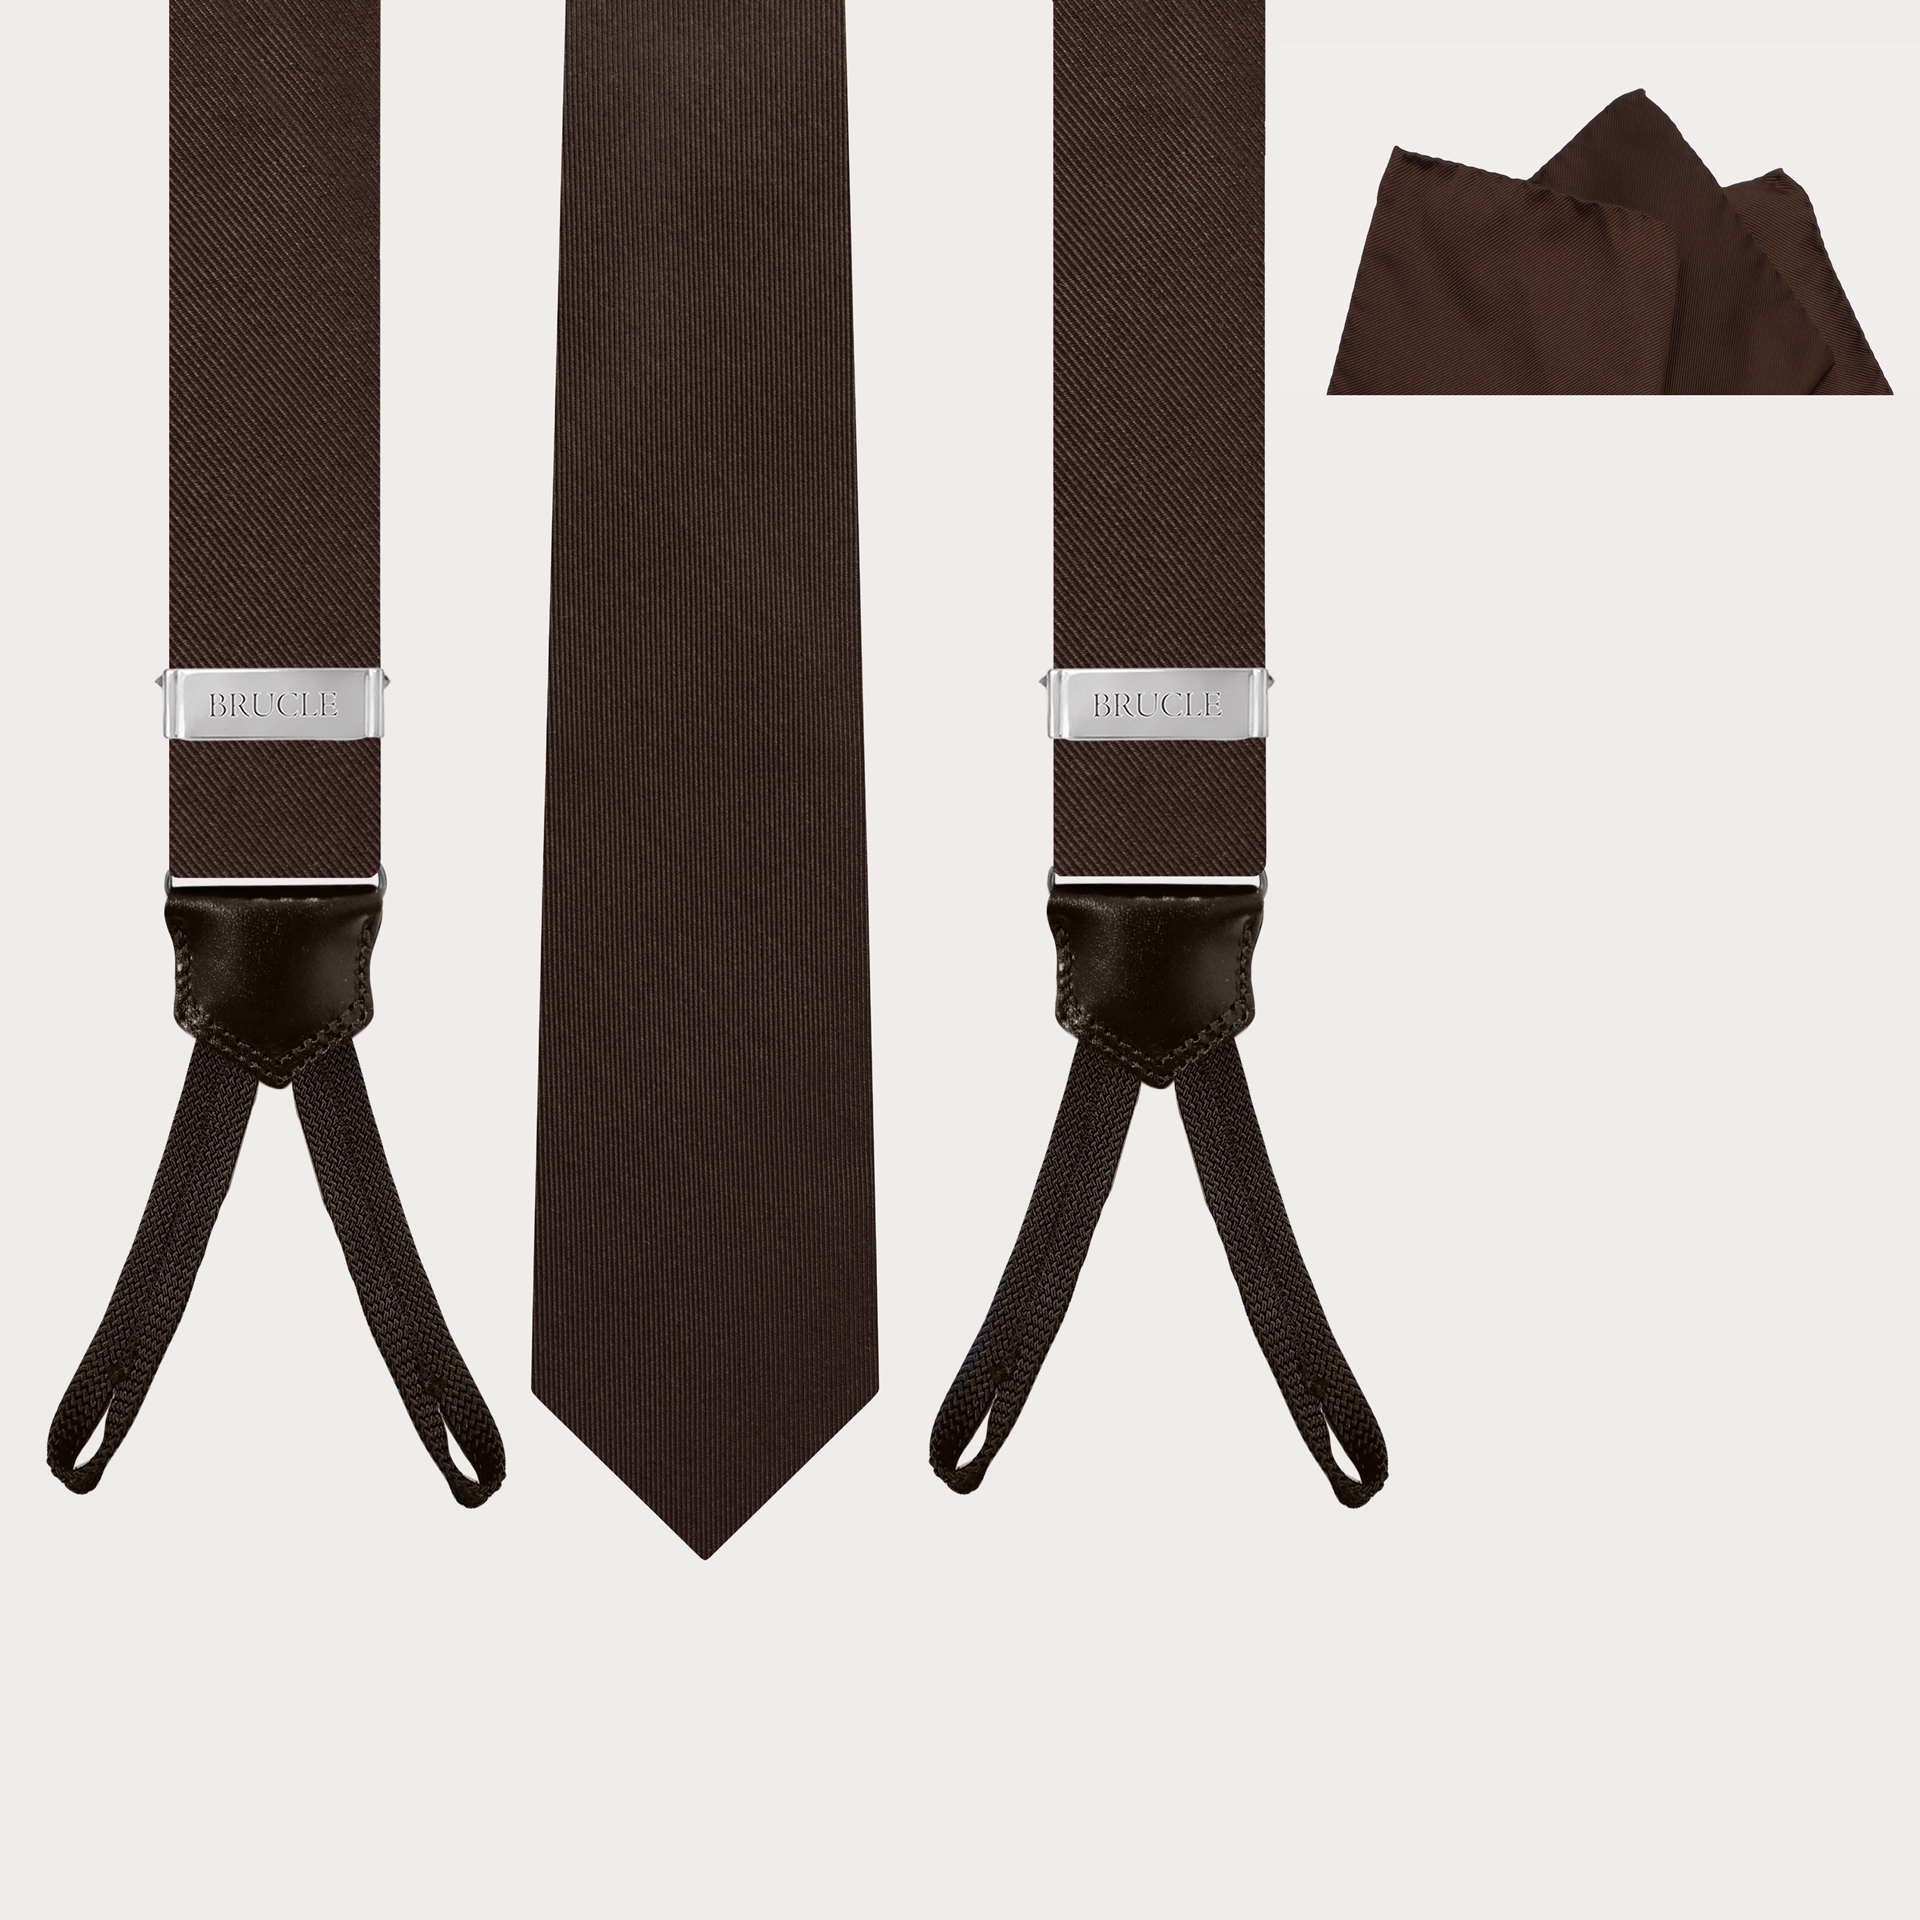 BRUCLE Elegant set of suspenders with buttonholes, tie and pocket square in brown silk